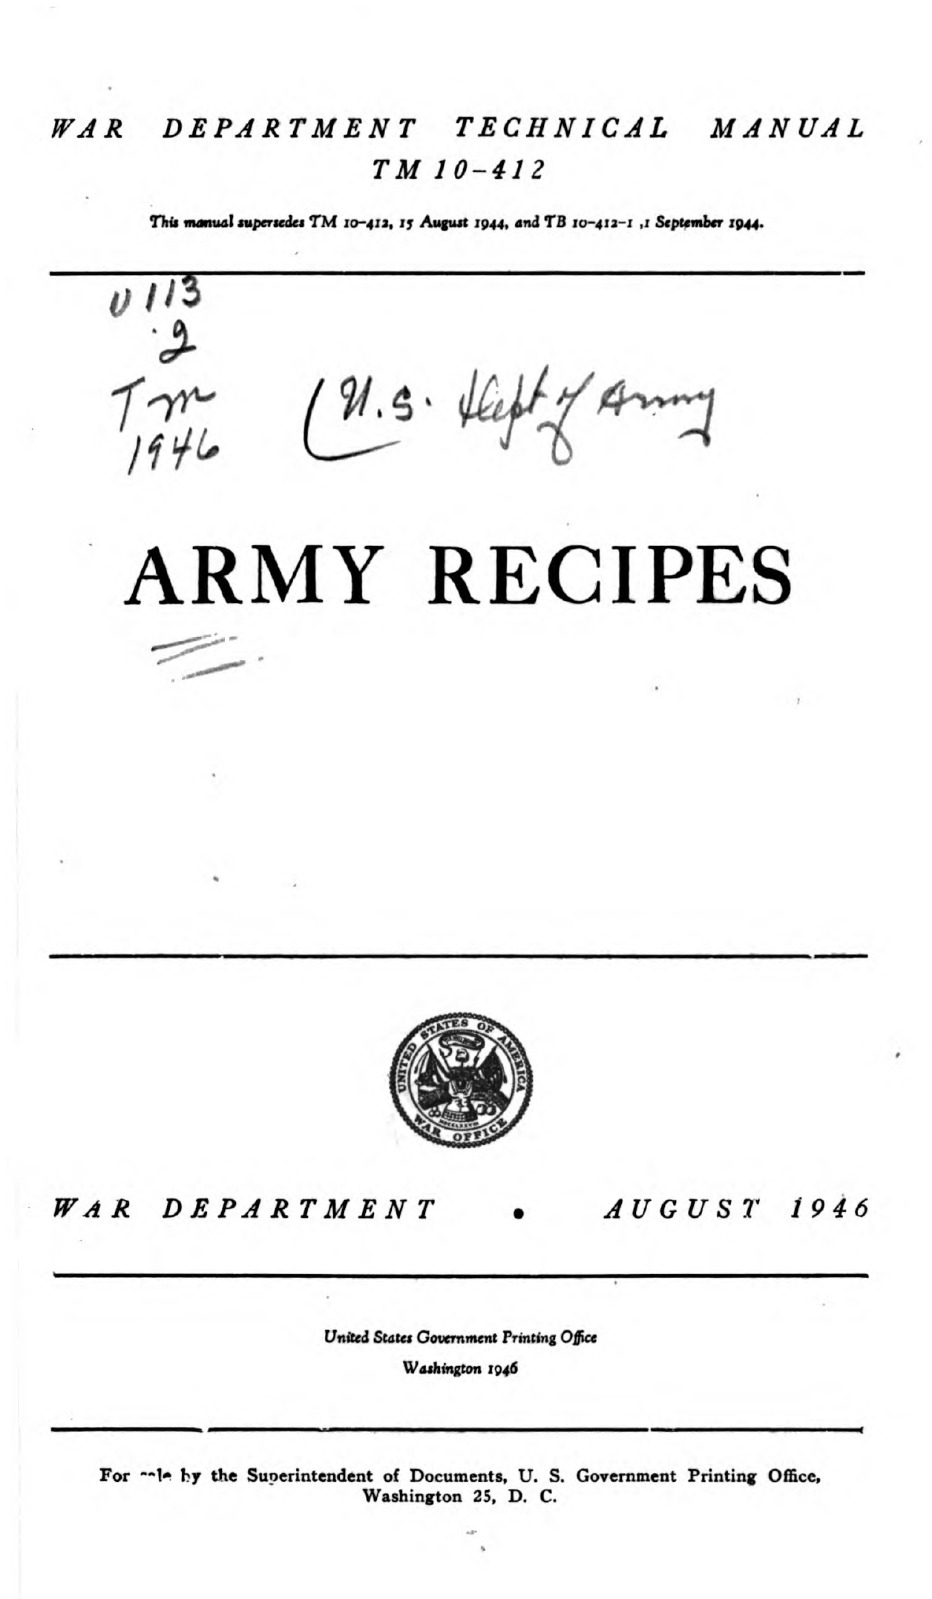 443 Page 1946 TM 10-412 ARMY RECIPES War Department Technical Manual on CD